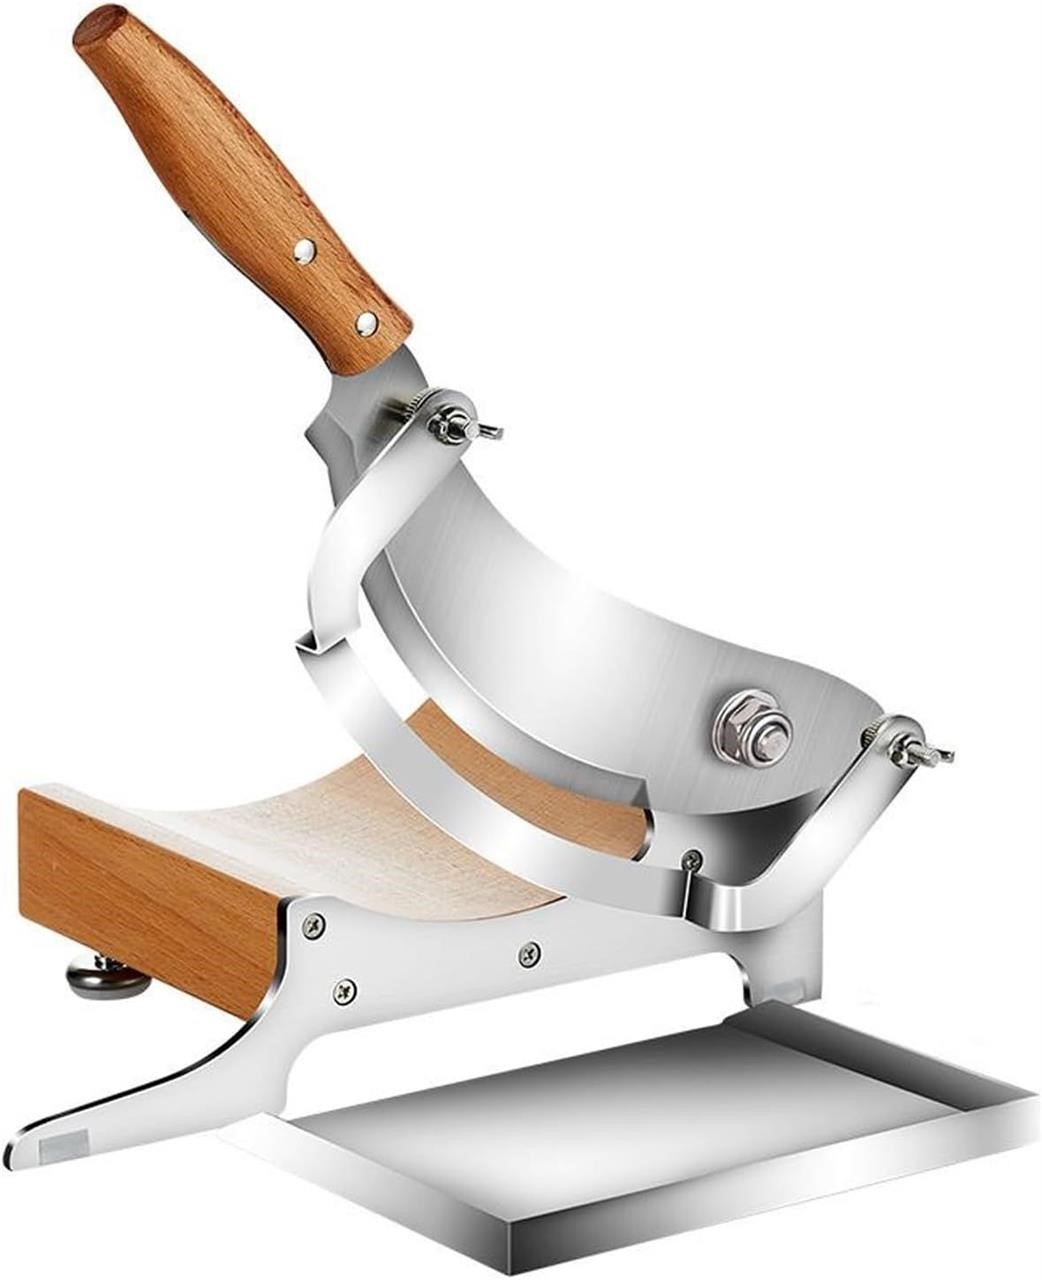 Stainless Steel Manual Meat Slicer